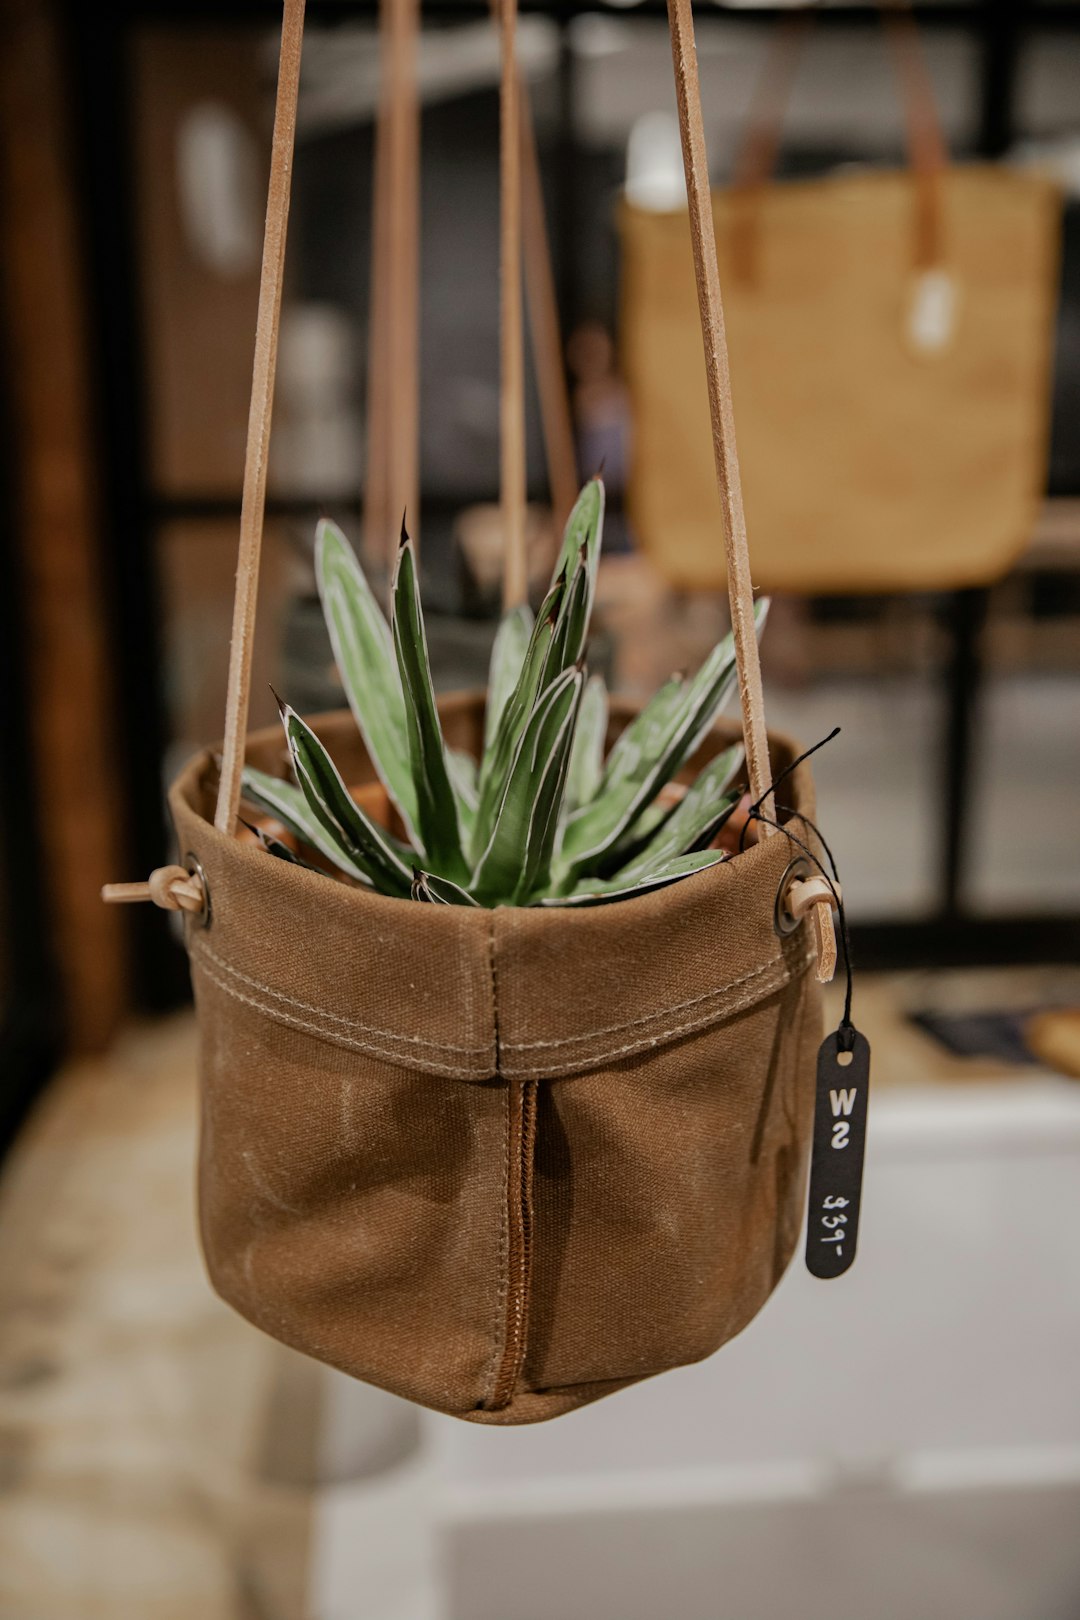 green plant on brown leather bag